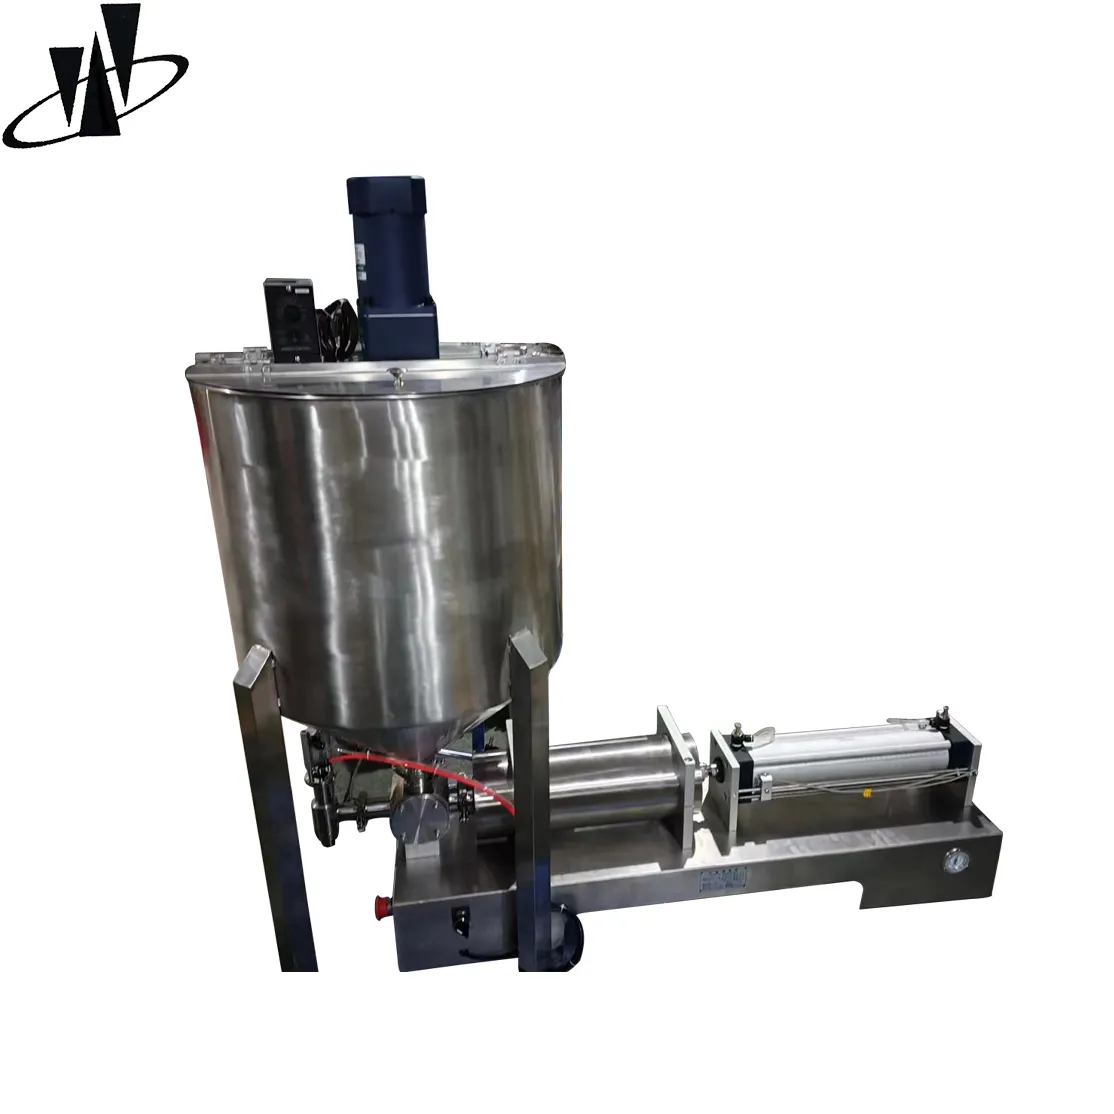 A Large Hopper of a Filling Machine Filling Volume of 5000ml in a a 100 Liter or 200 Liter Small Juice Filling Machine